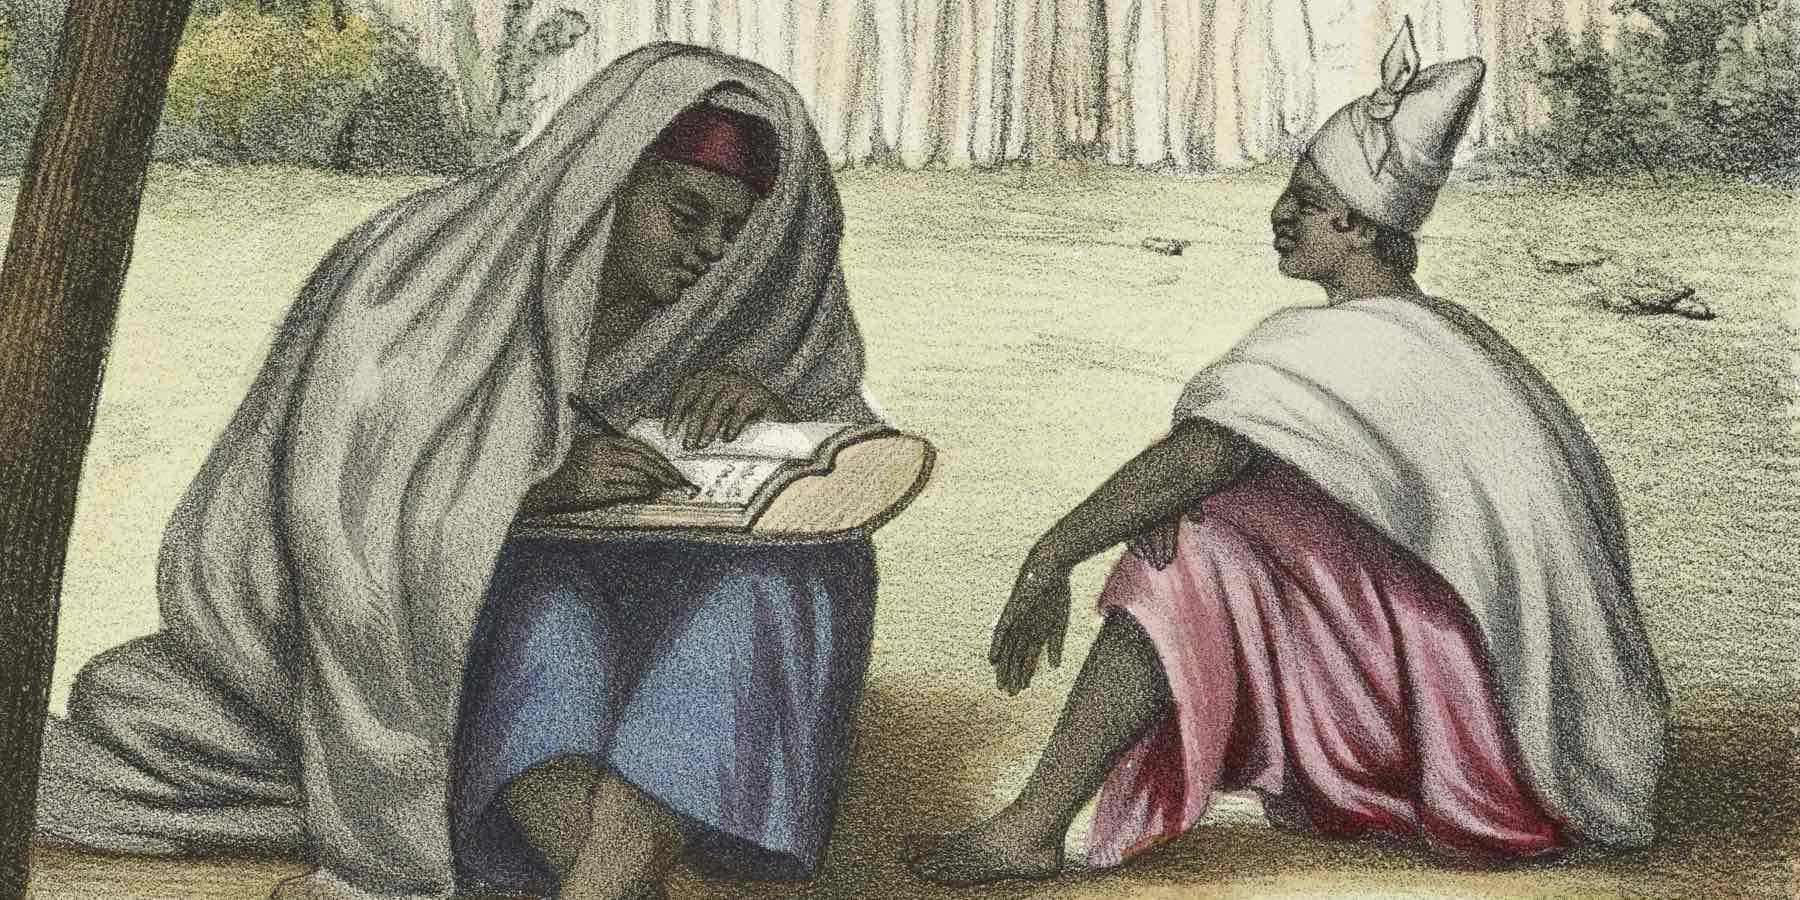 Senegalese sketches from British Library